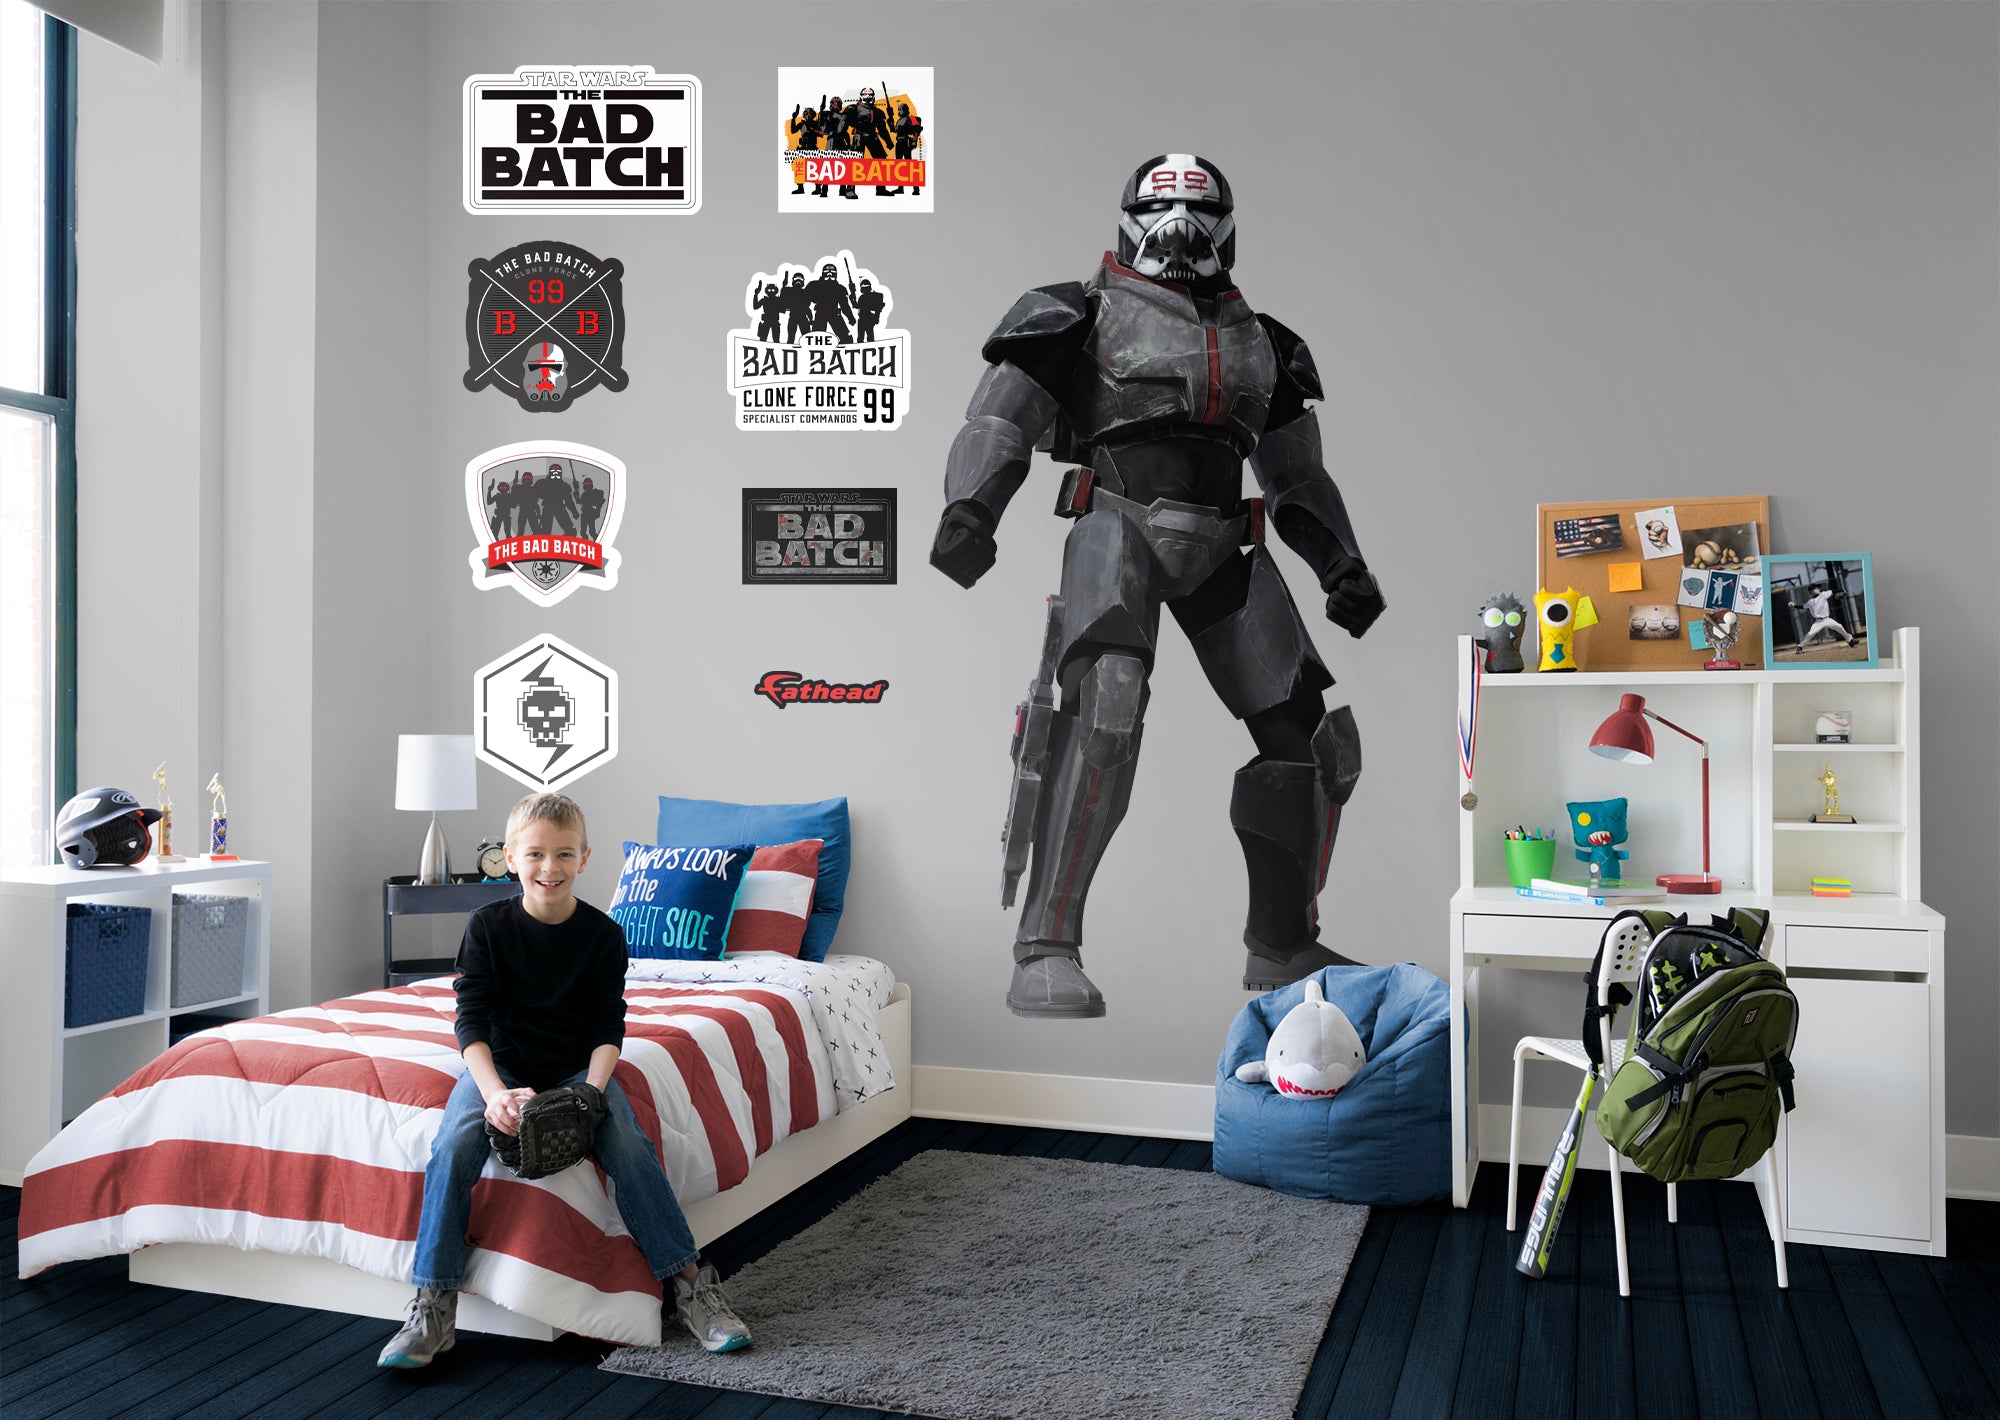 Bad Batch Wrecker - Officially Licensed Star Wars Removable Wall Decal XL by Fathead | Vinyl